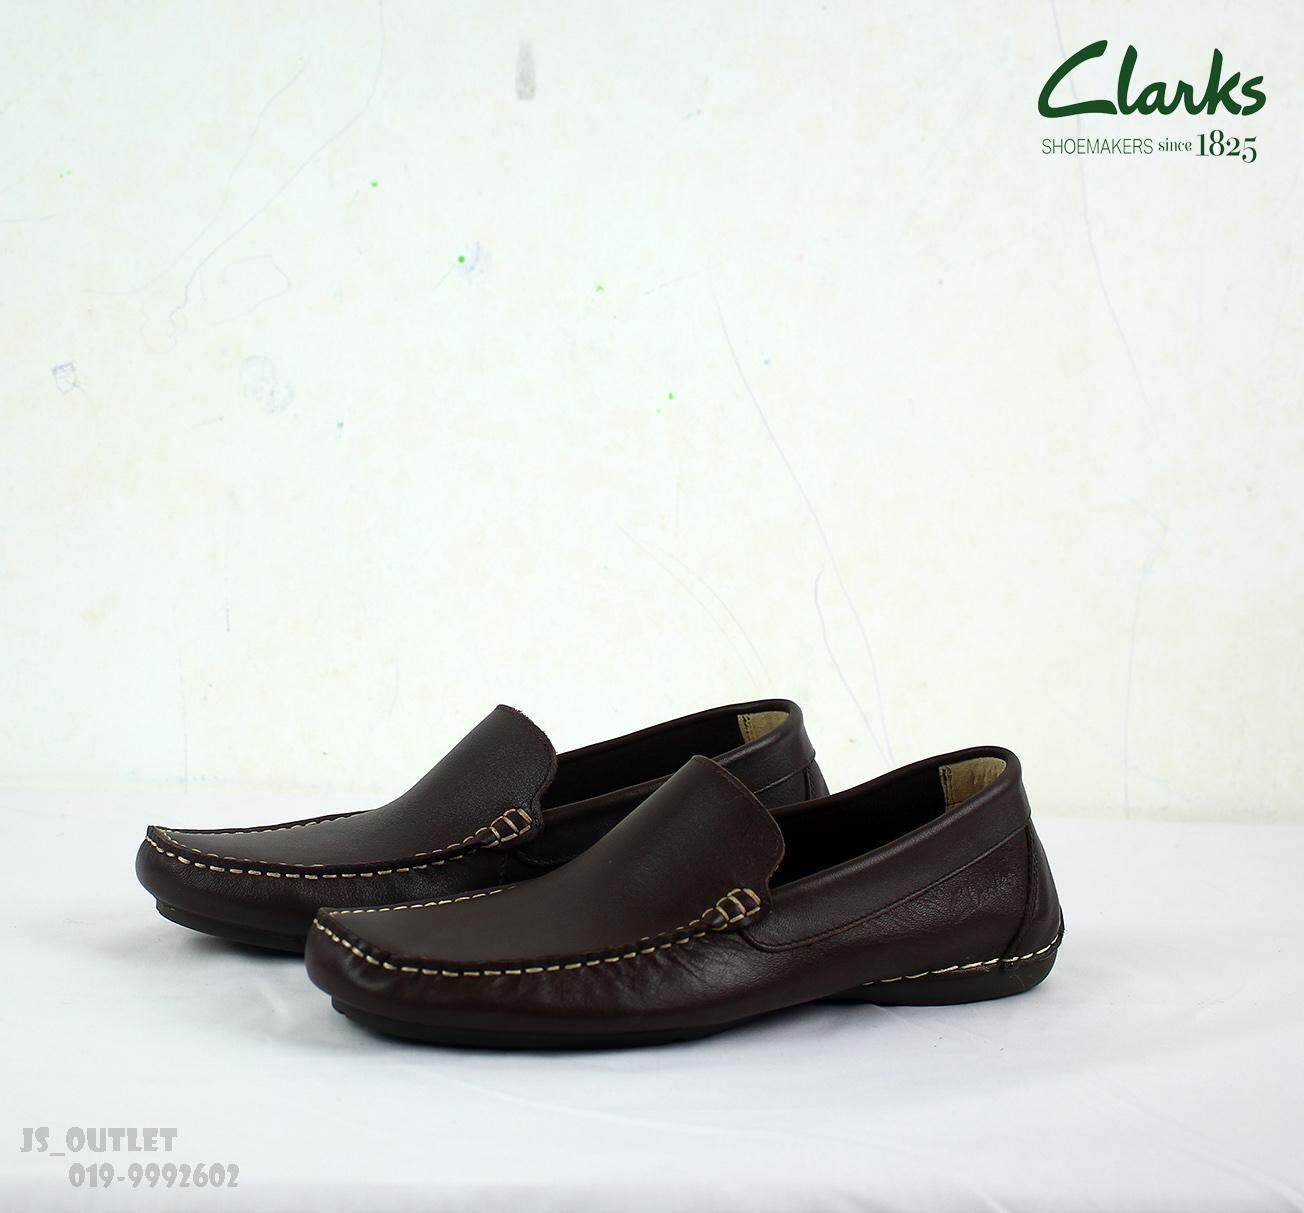 clarks 1825 price off 72% - online-sms.in